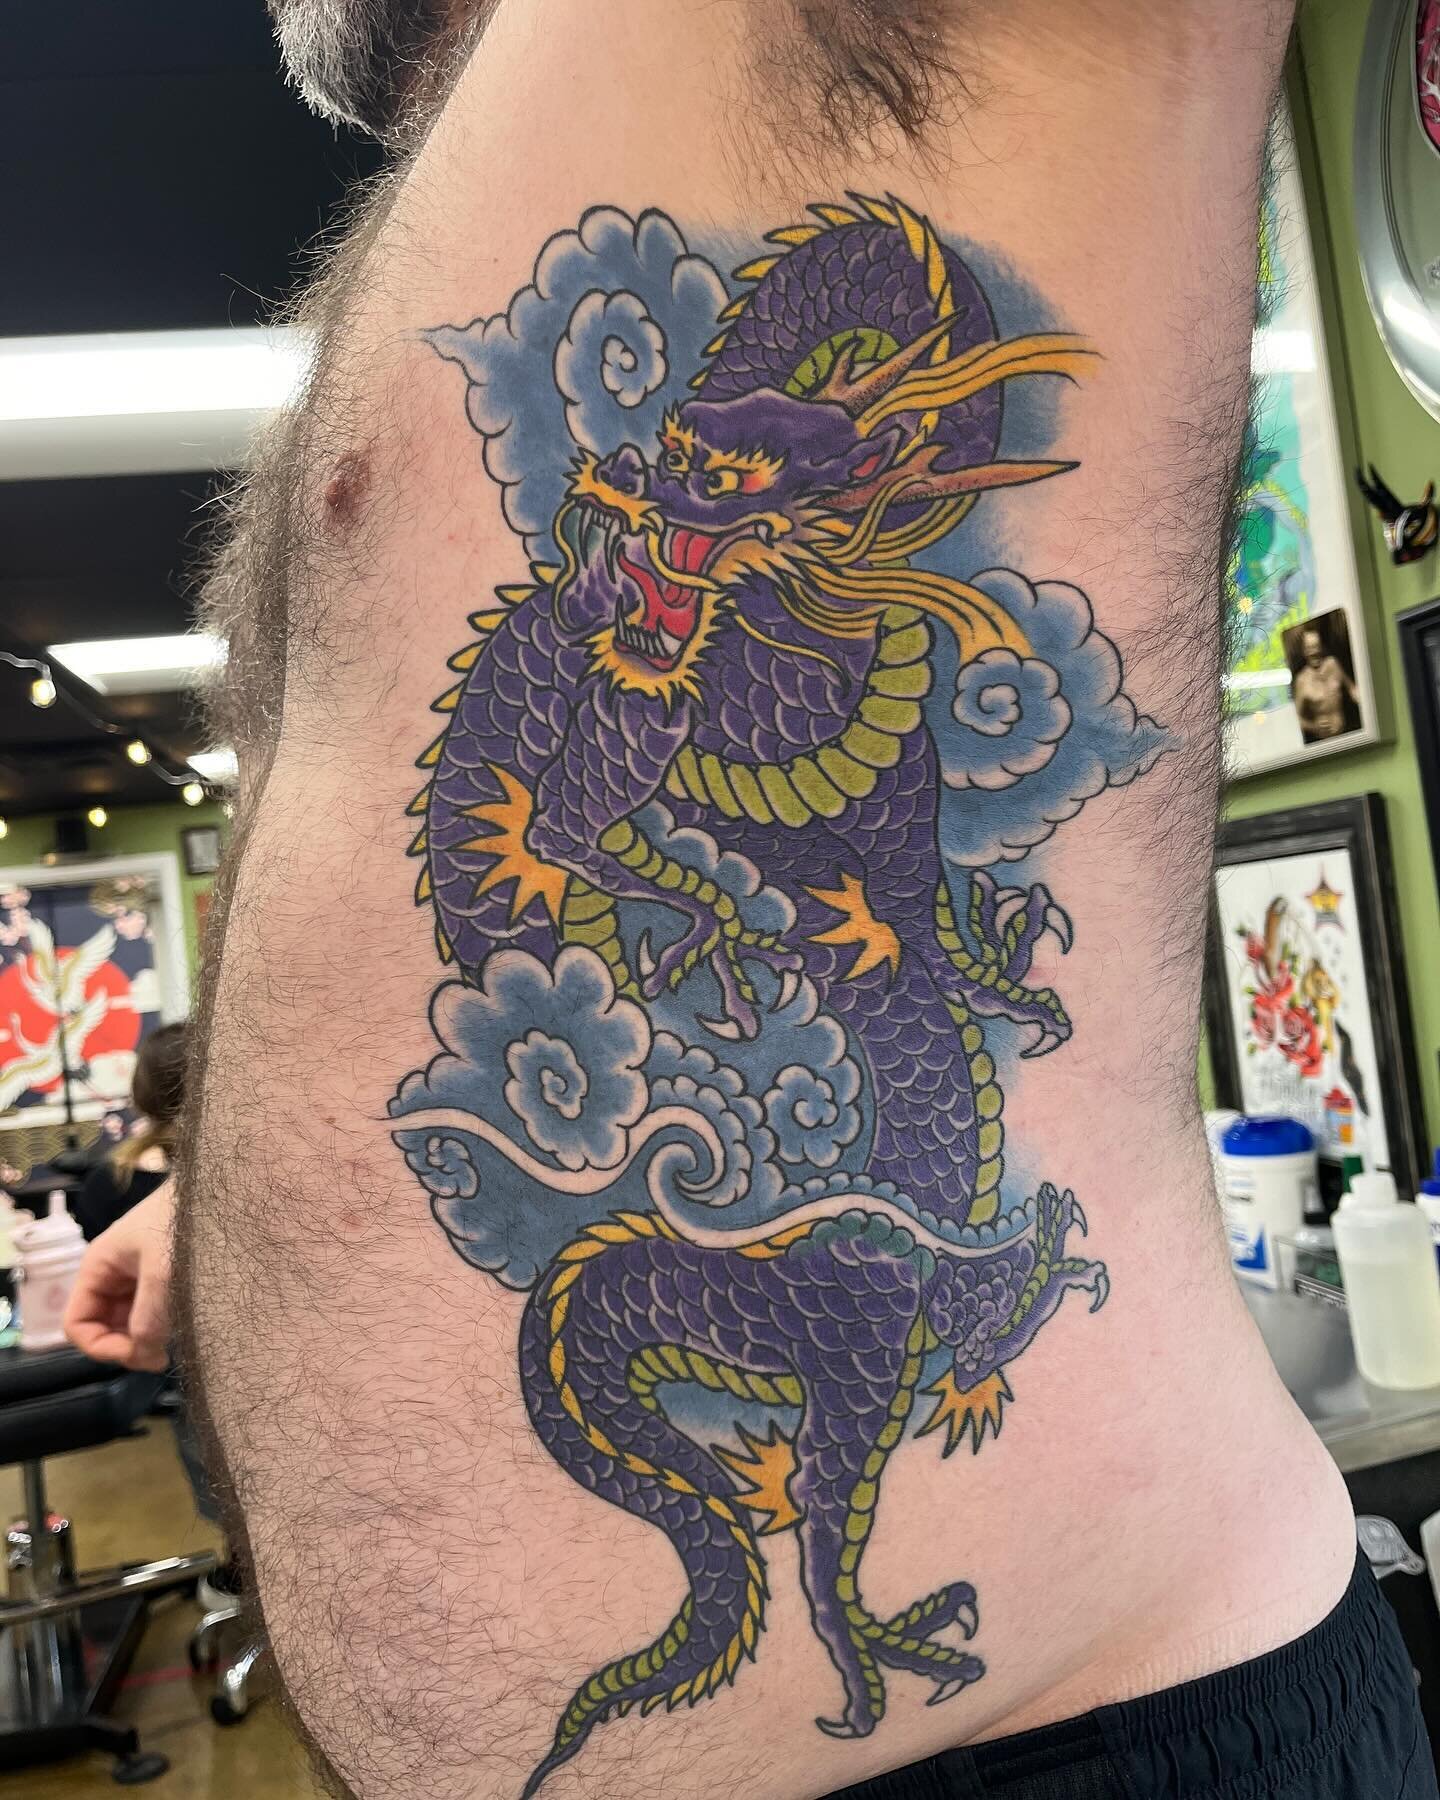 Did you see Brian&rsquo;s Dragon?! Solid!!! Tattoo by James #bethesda #bethesdatattoo #bethesdatattooartist #dmvtattooartist